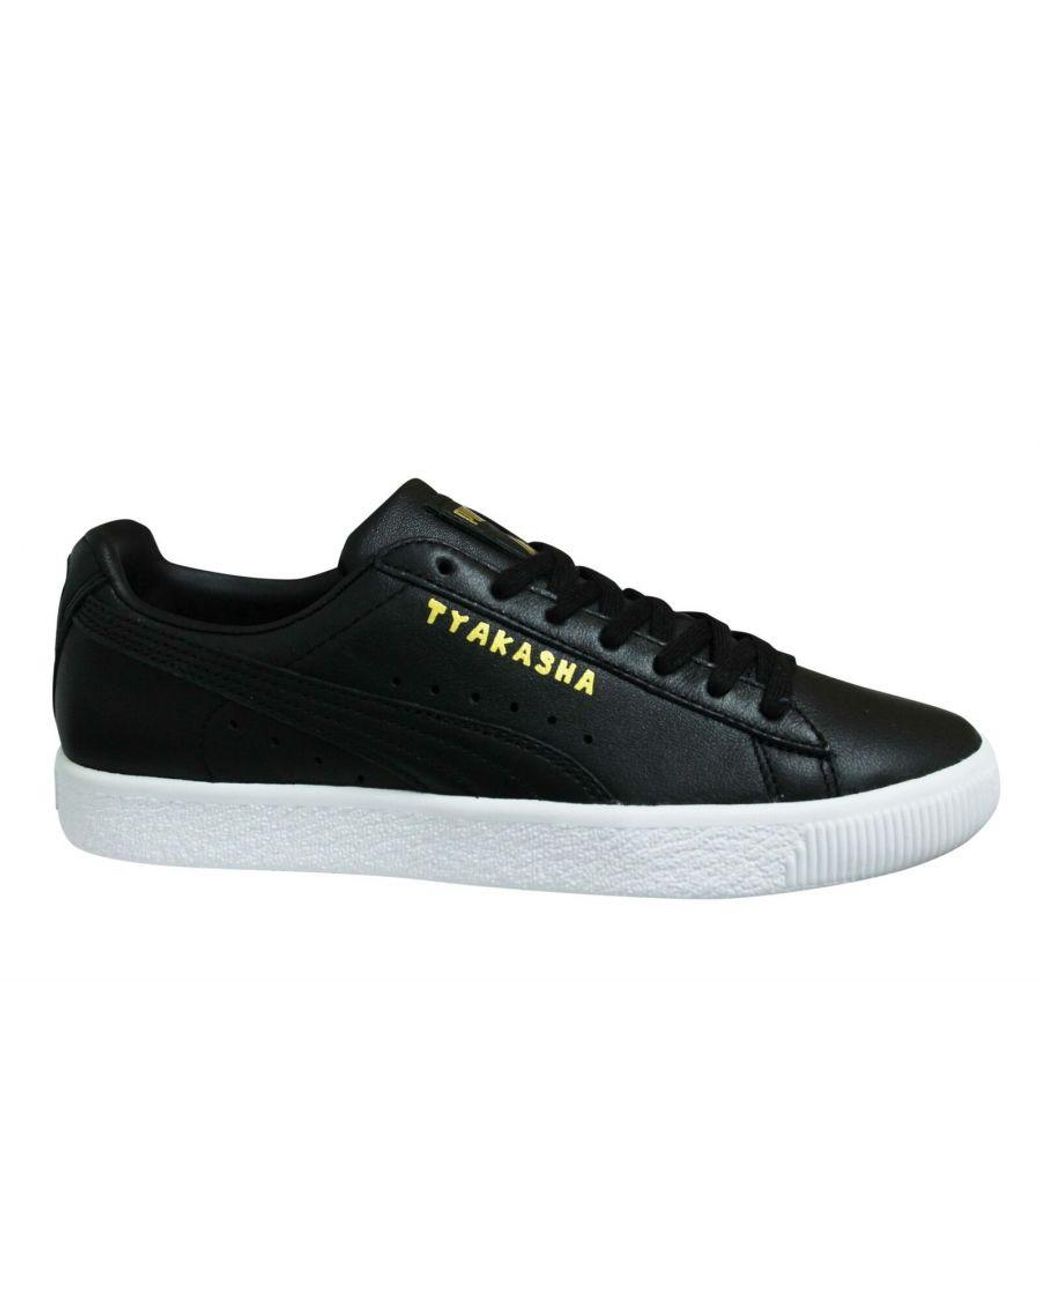 PUMA Clyde Tyakasha Black Leather Low Lace Up Casual Trainers 368070 01  Leather for Men | Lyst UK